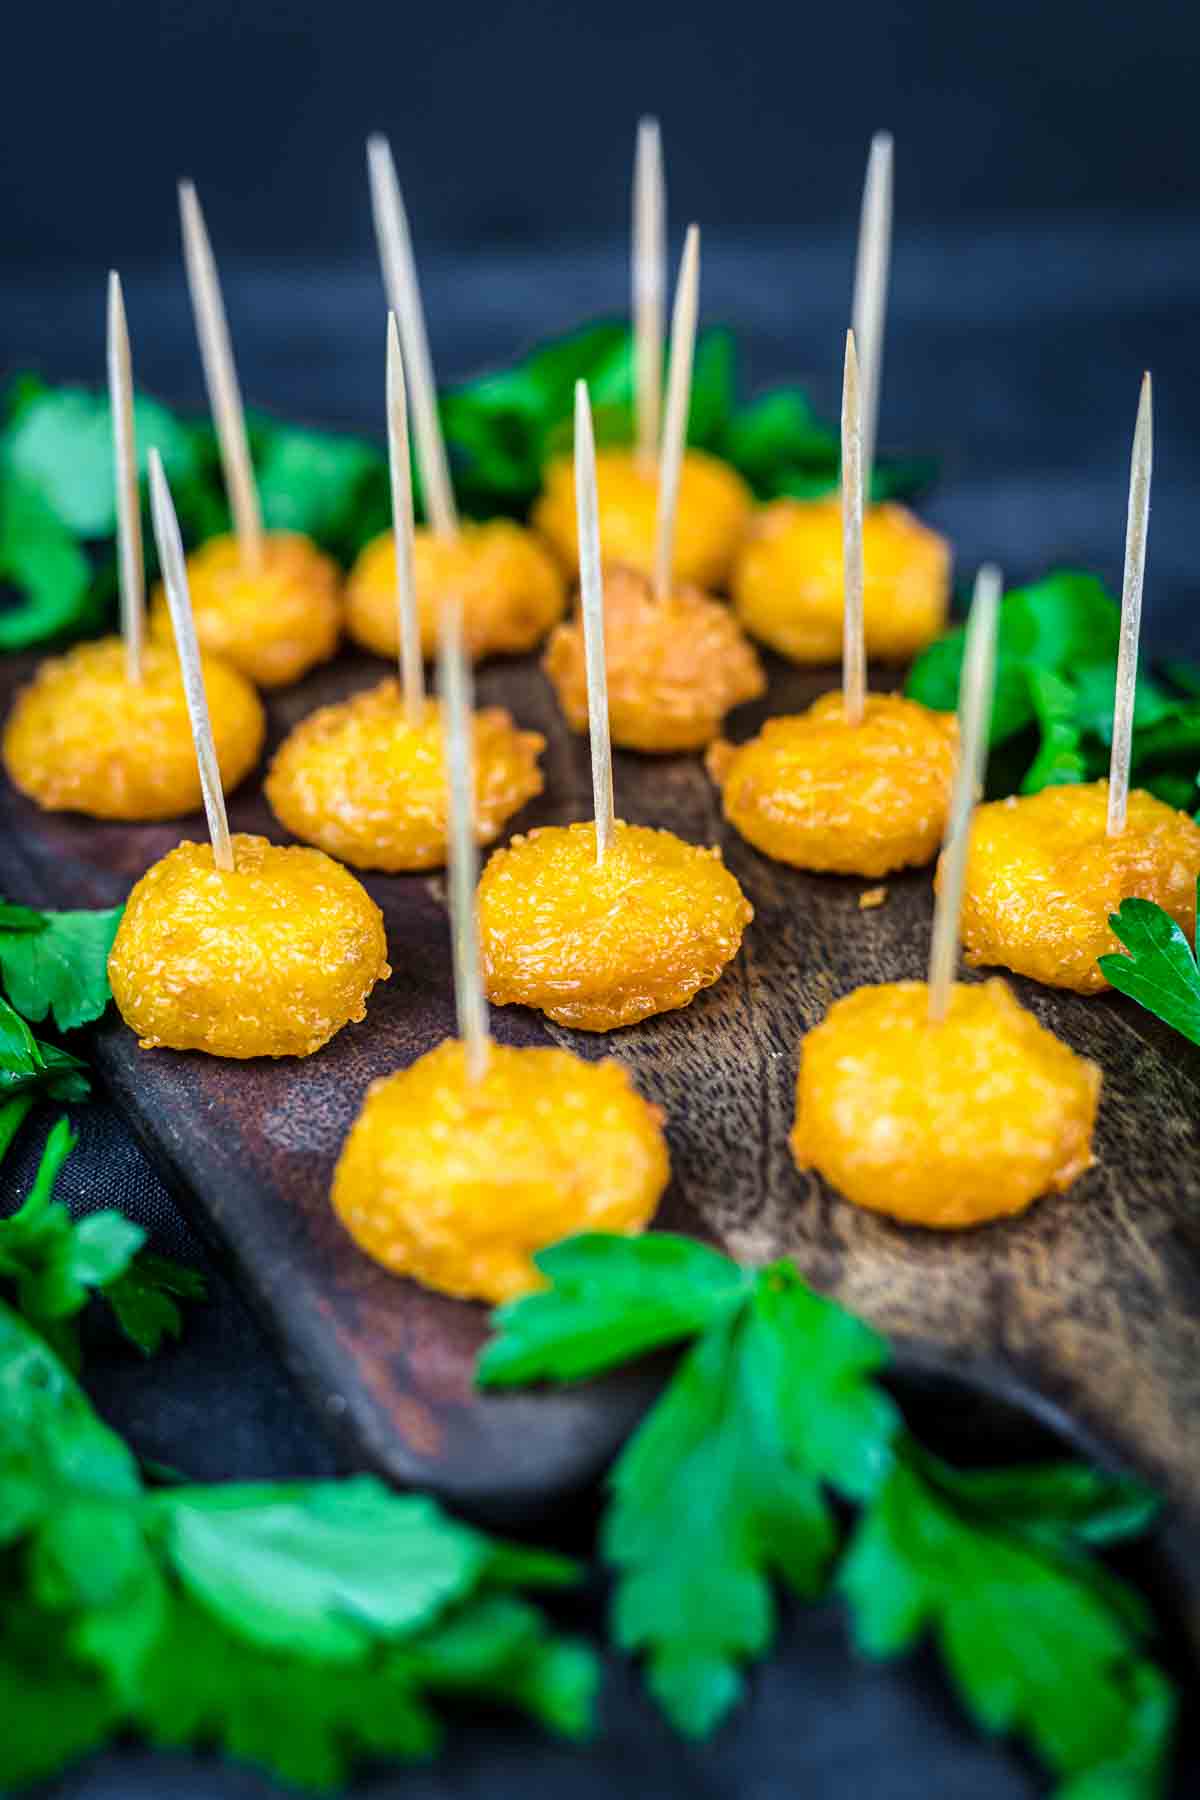 Fried Cheddar Cheese Balls with sticks